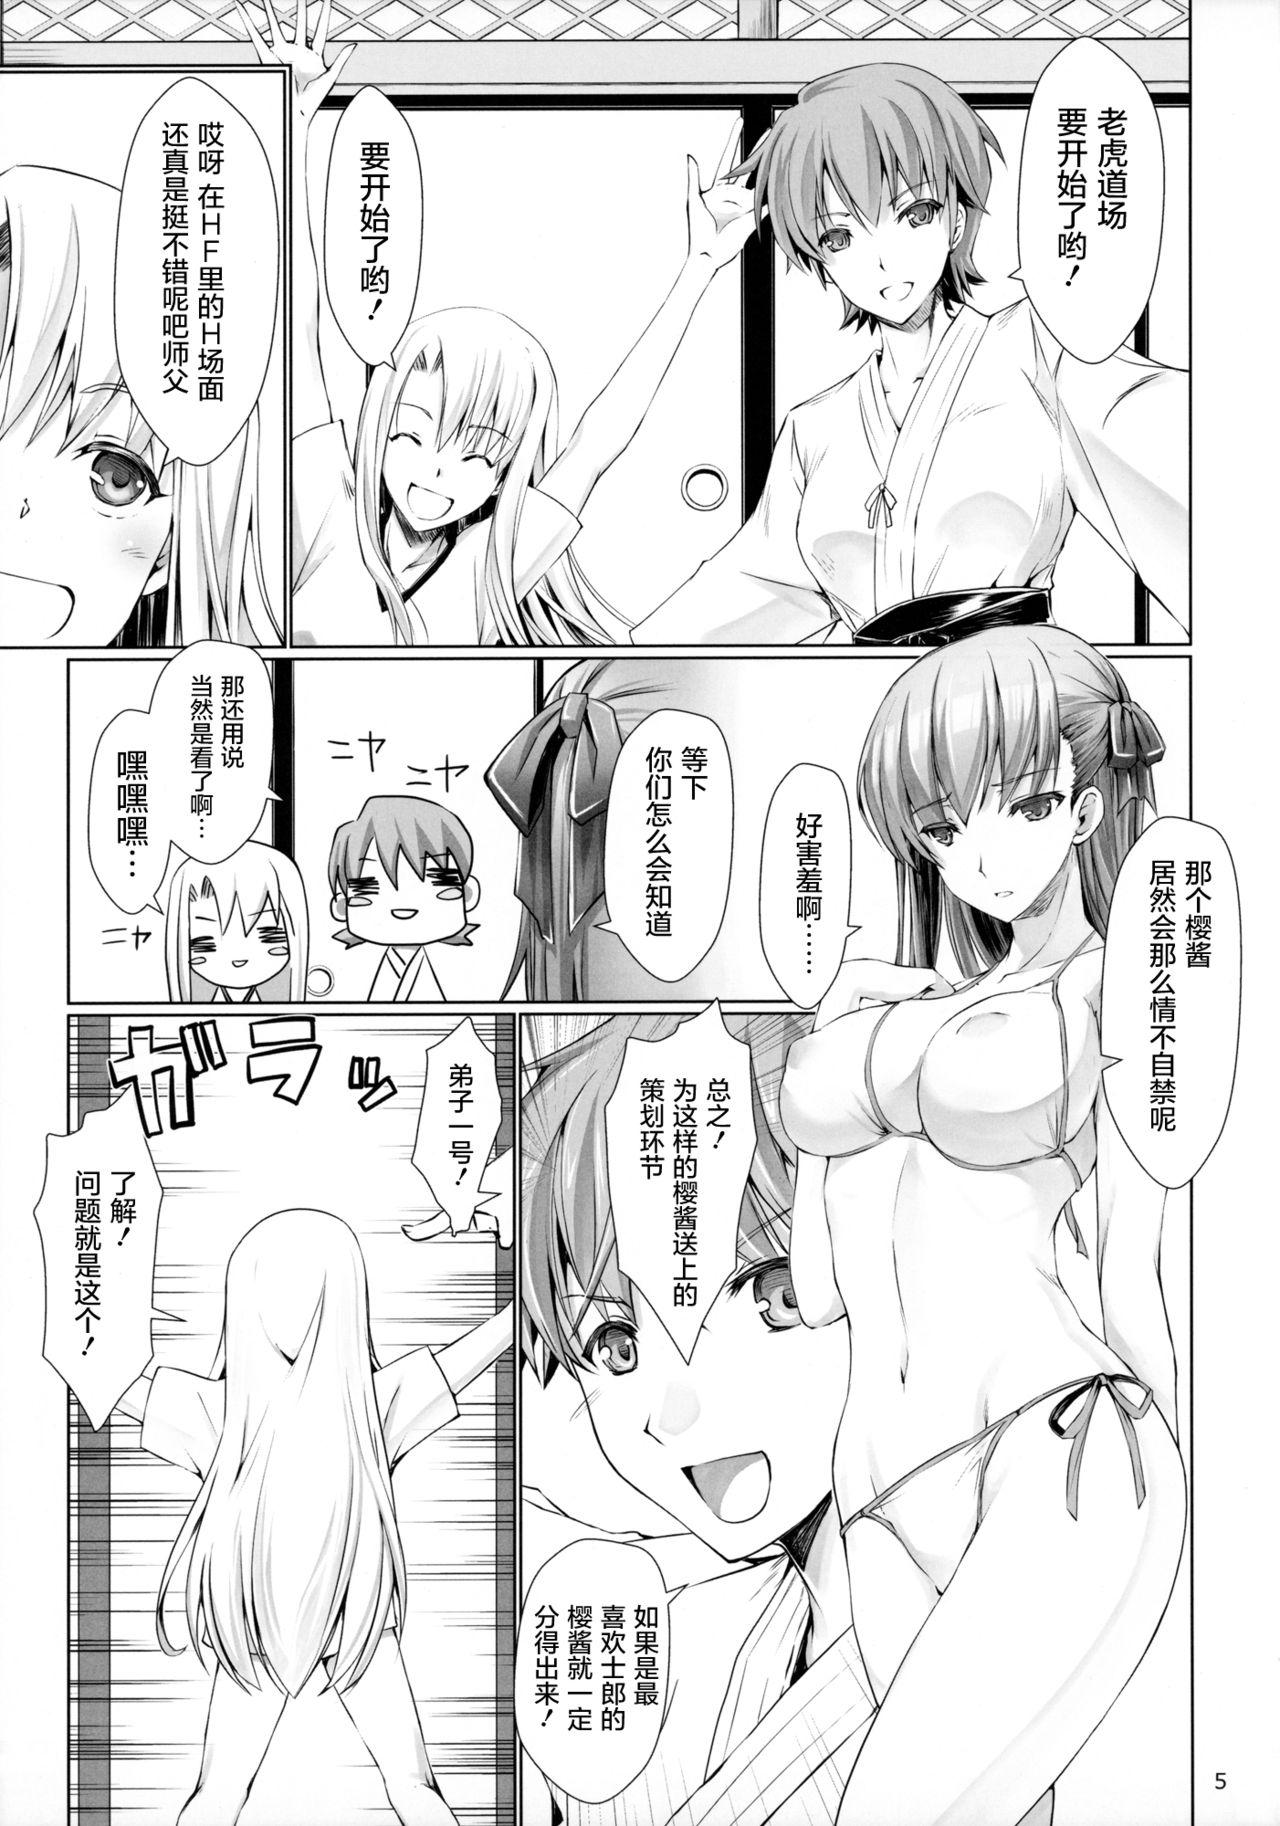 Aussie I miss you. - Fate stay night Amatures Gone Wild - Page 5